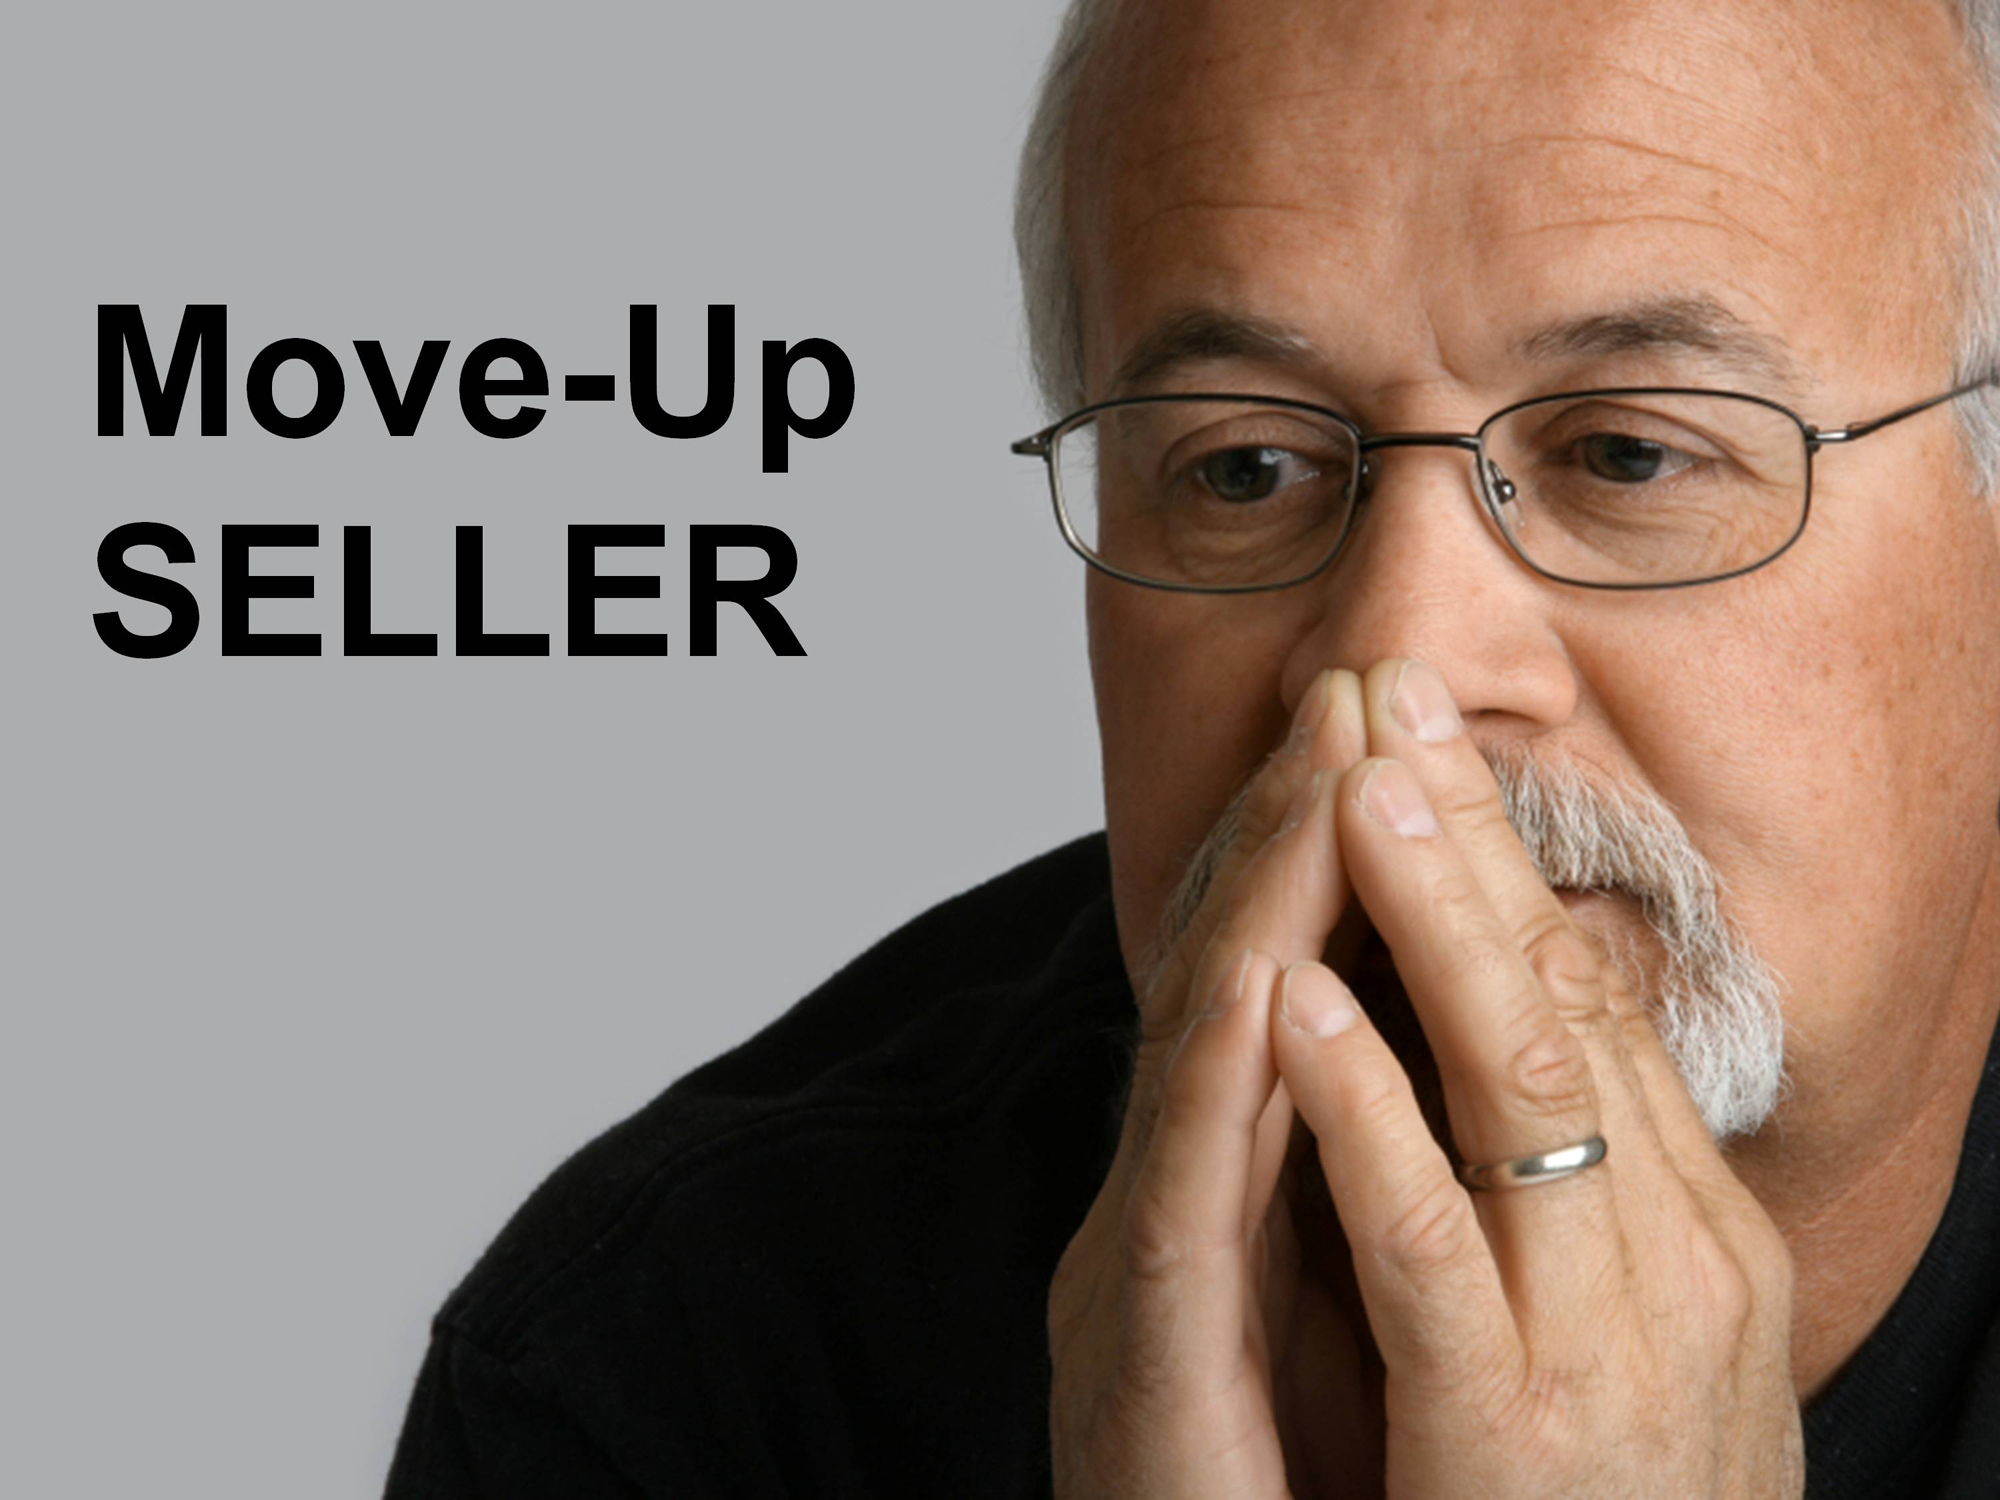 move_up_seller_february2014-221_2000